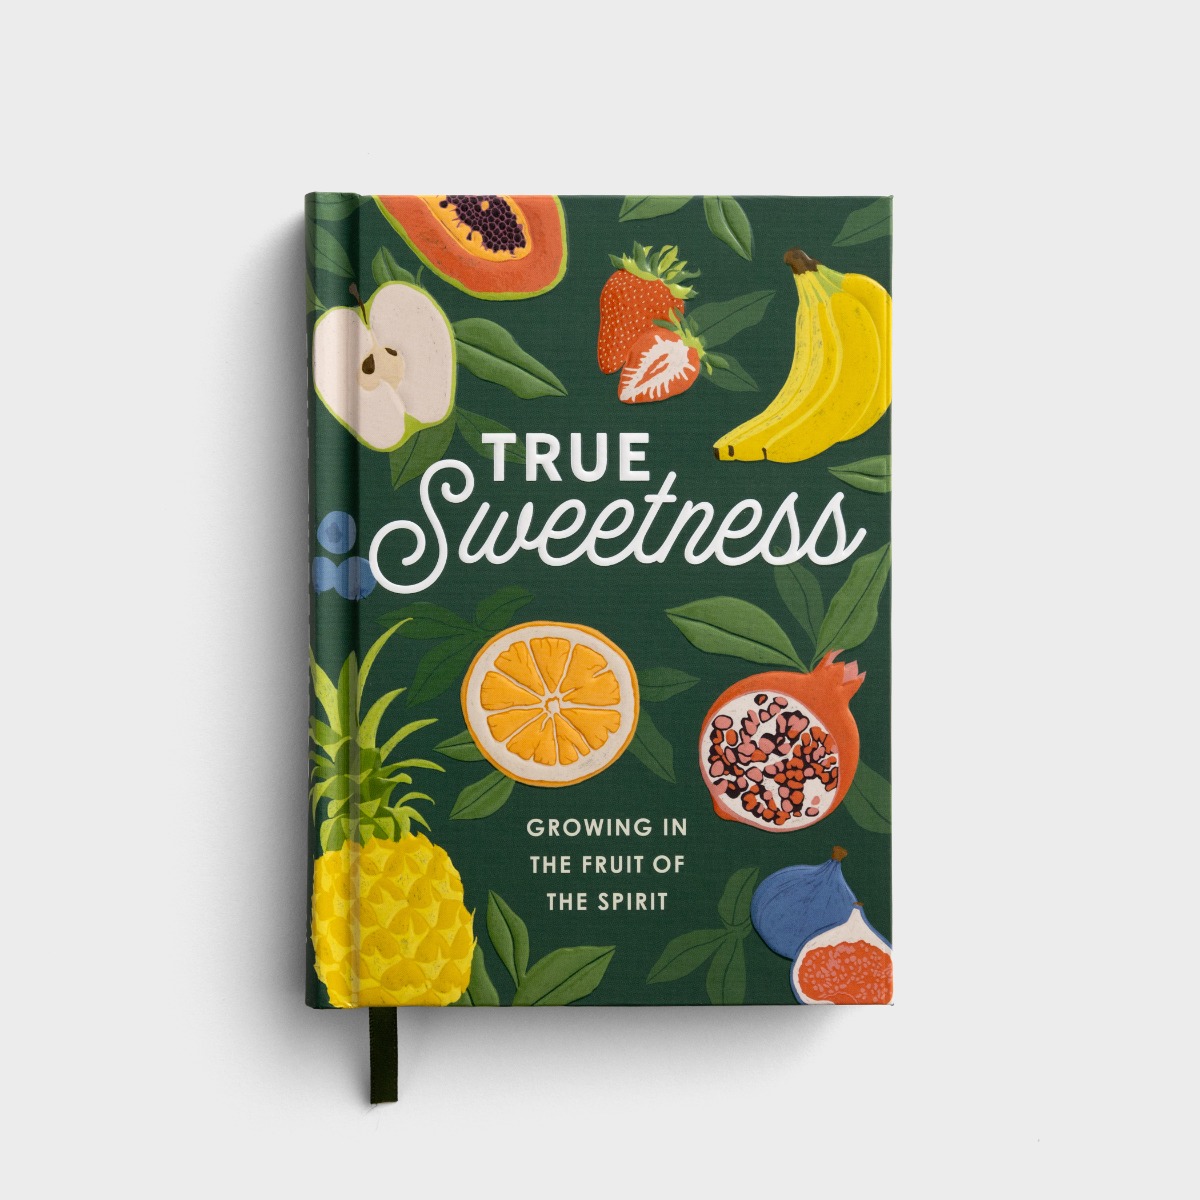 True Sweetness: Growing in the Fruits of the Spirit